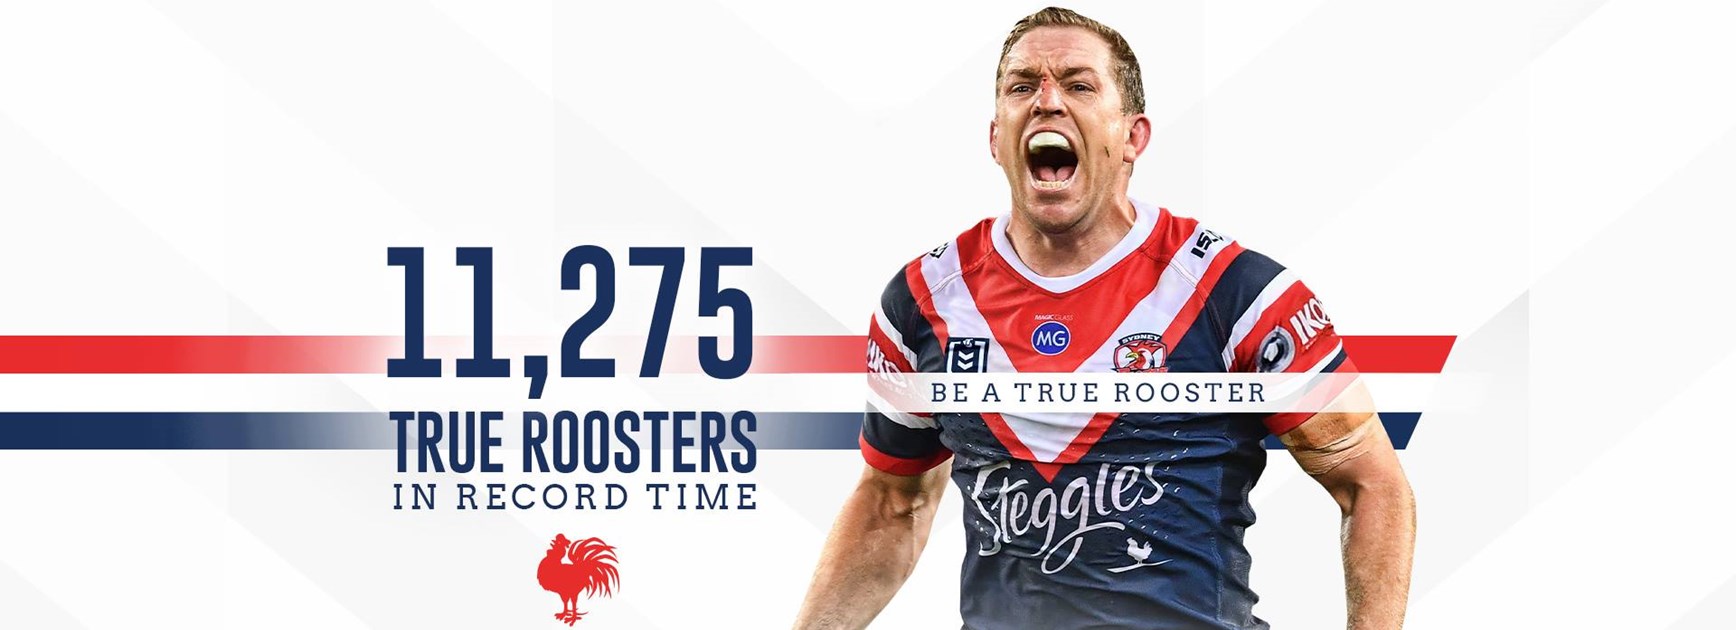 Roosters secure 11,000 True Roosters in record time